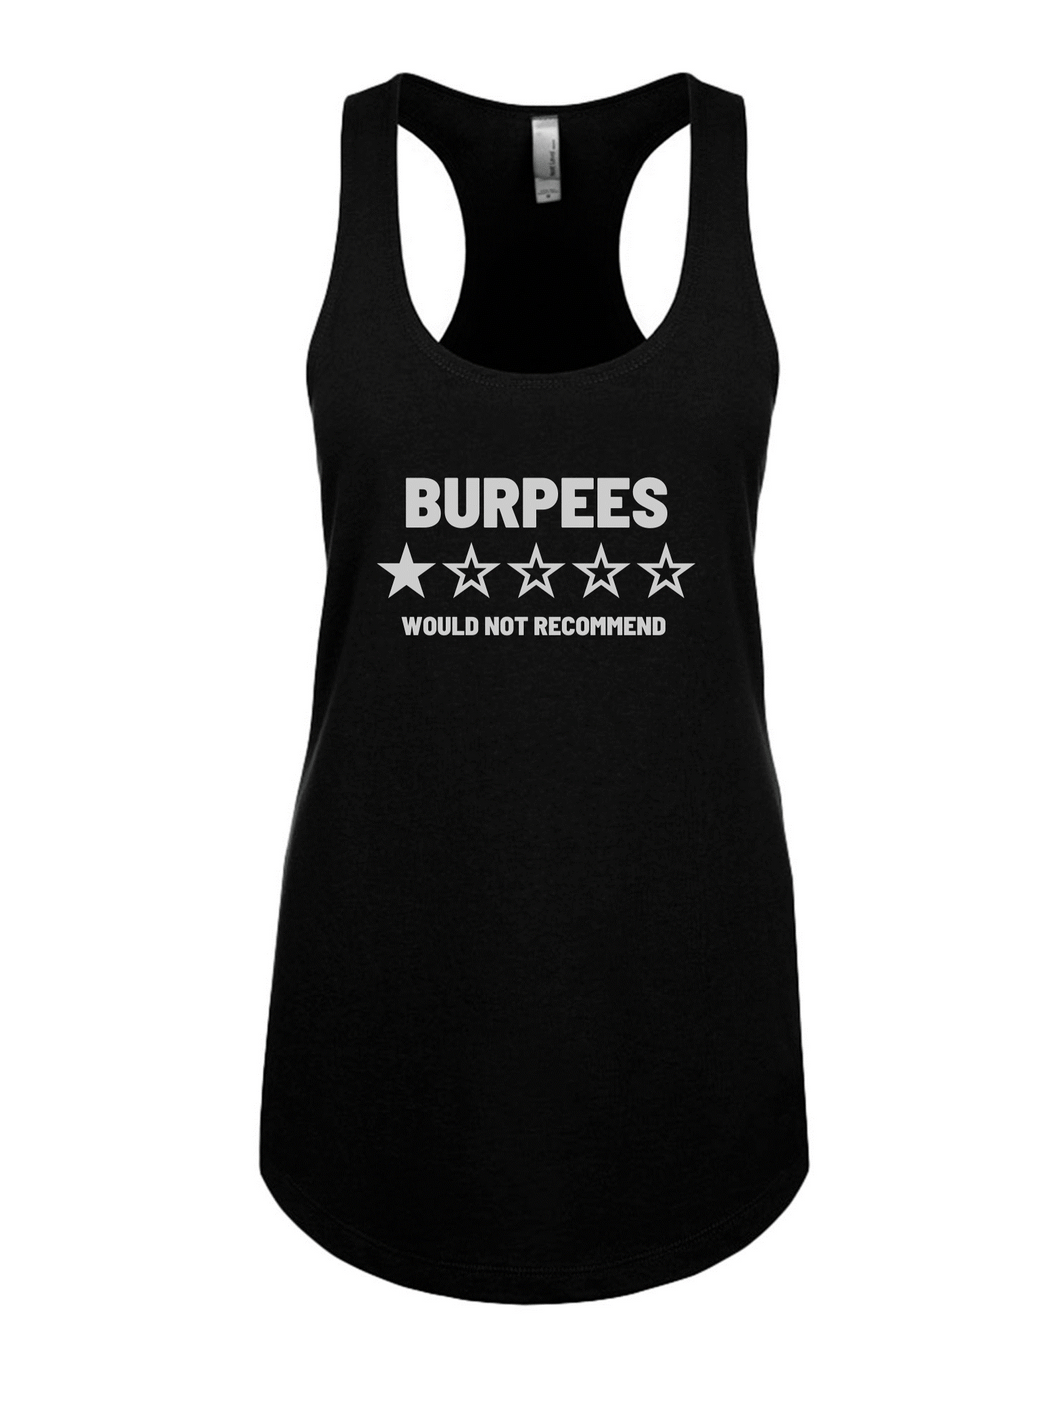 Burpees (Tank and Tee)